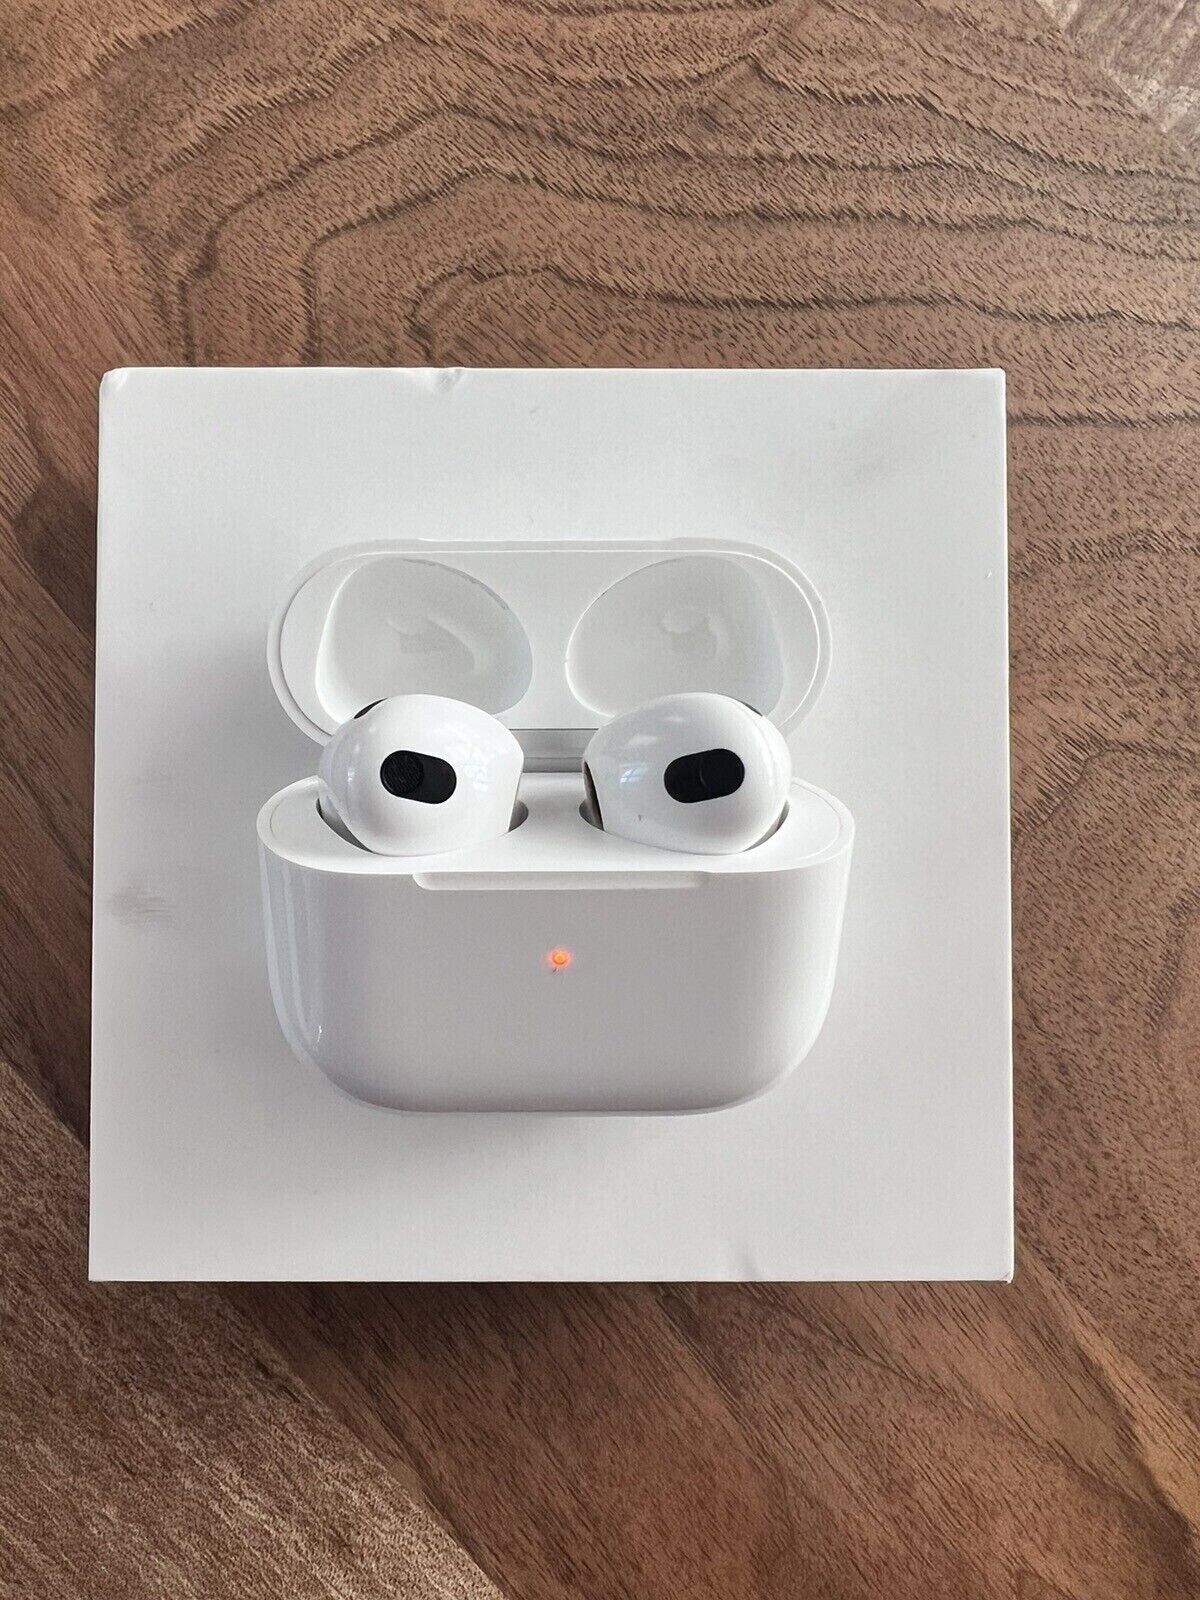 Apple AirPods 3rd Generation Wireless In-Ear Headset Authentic and Original/US